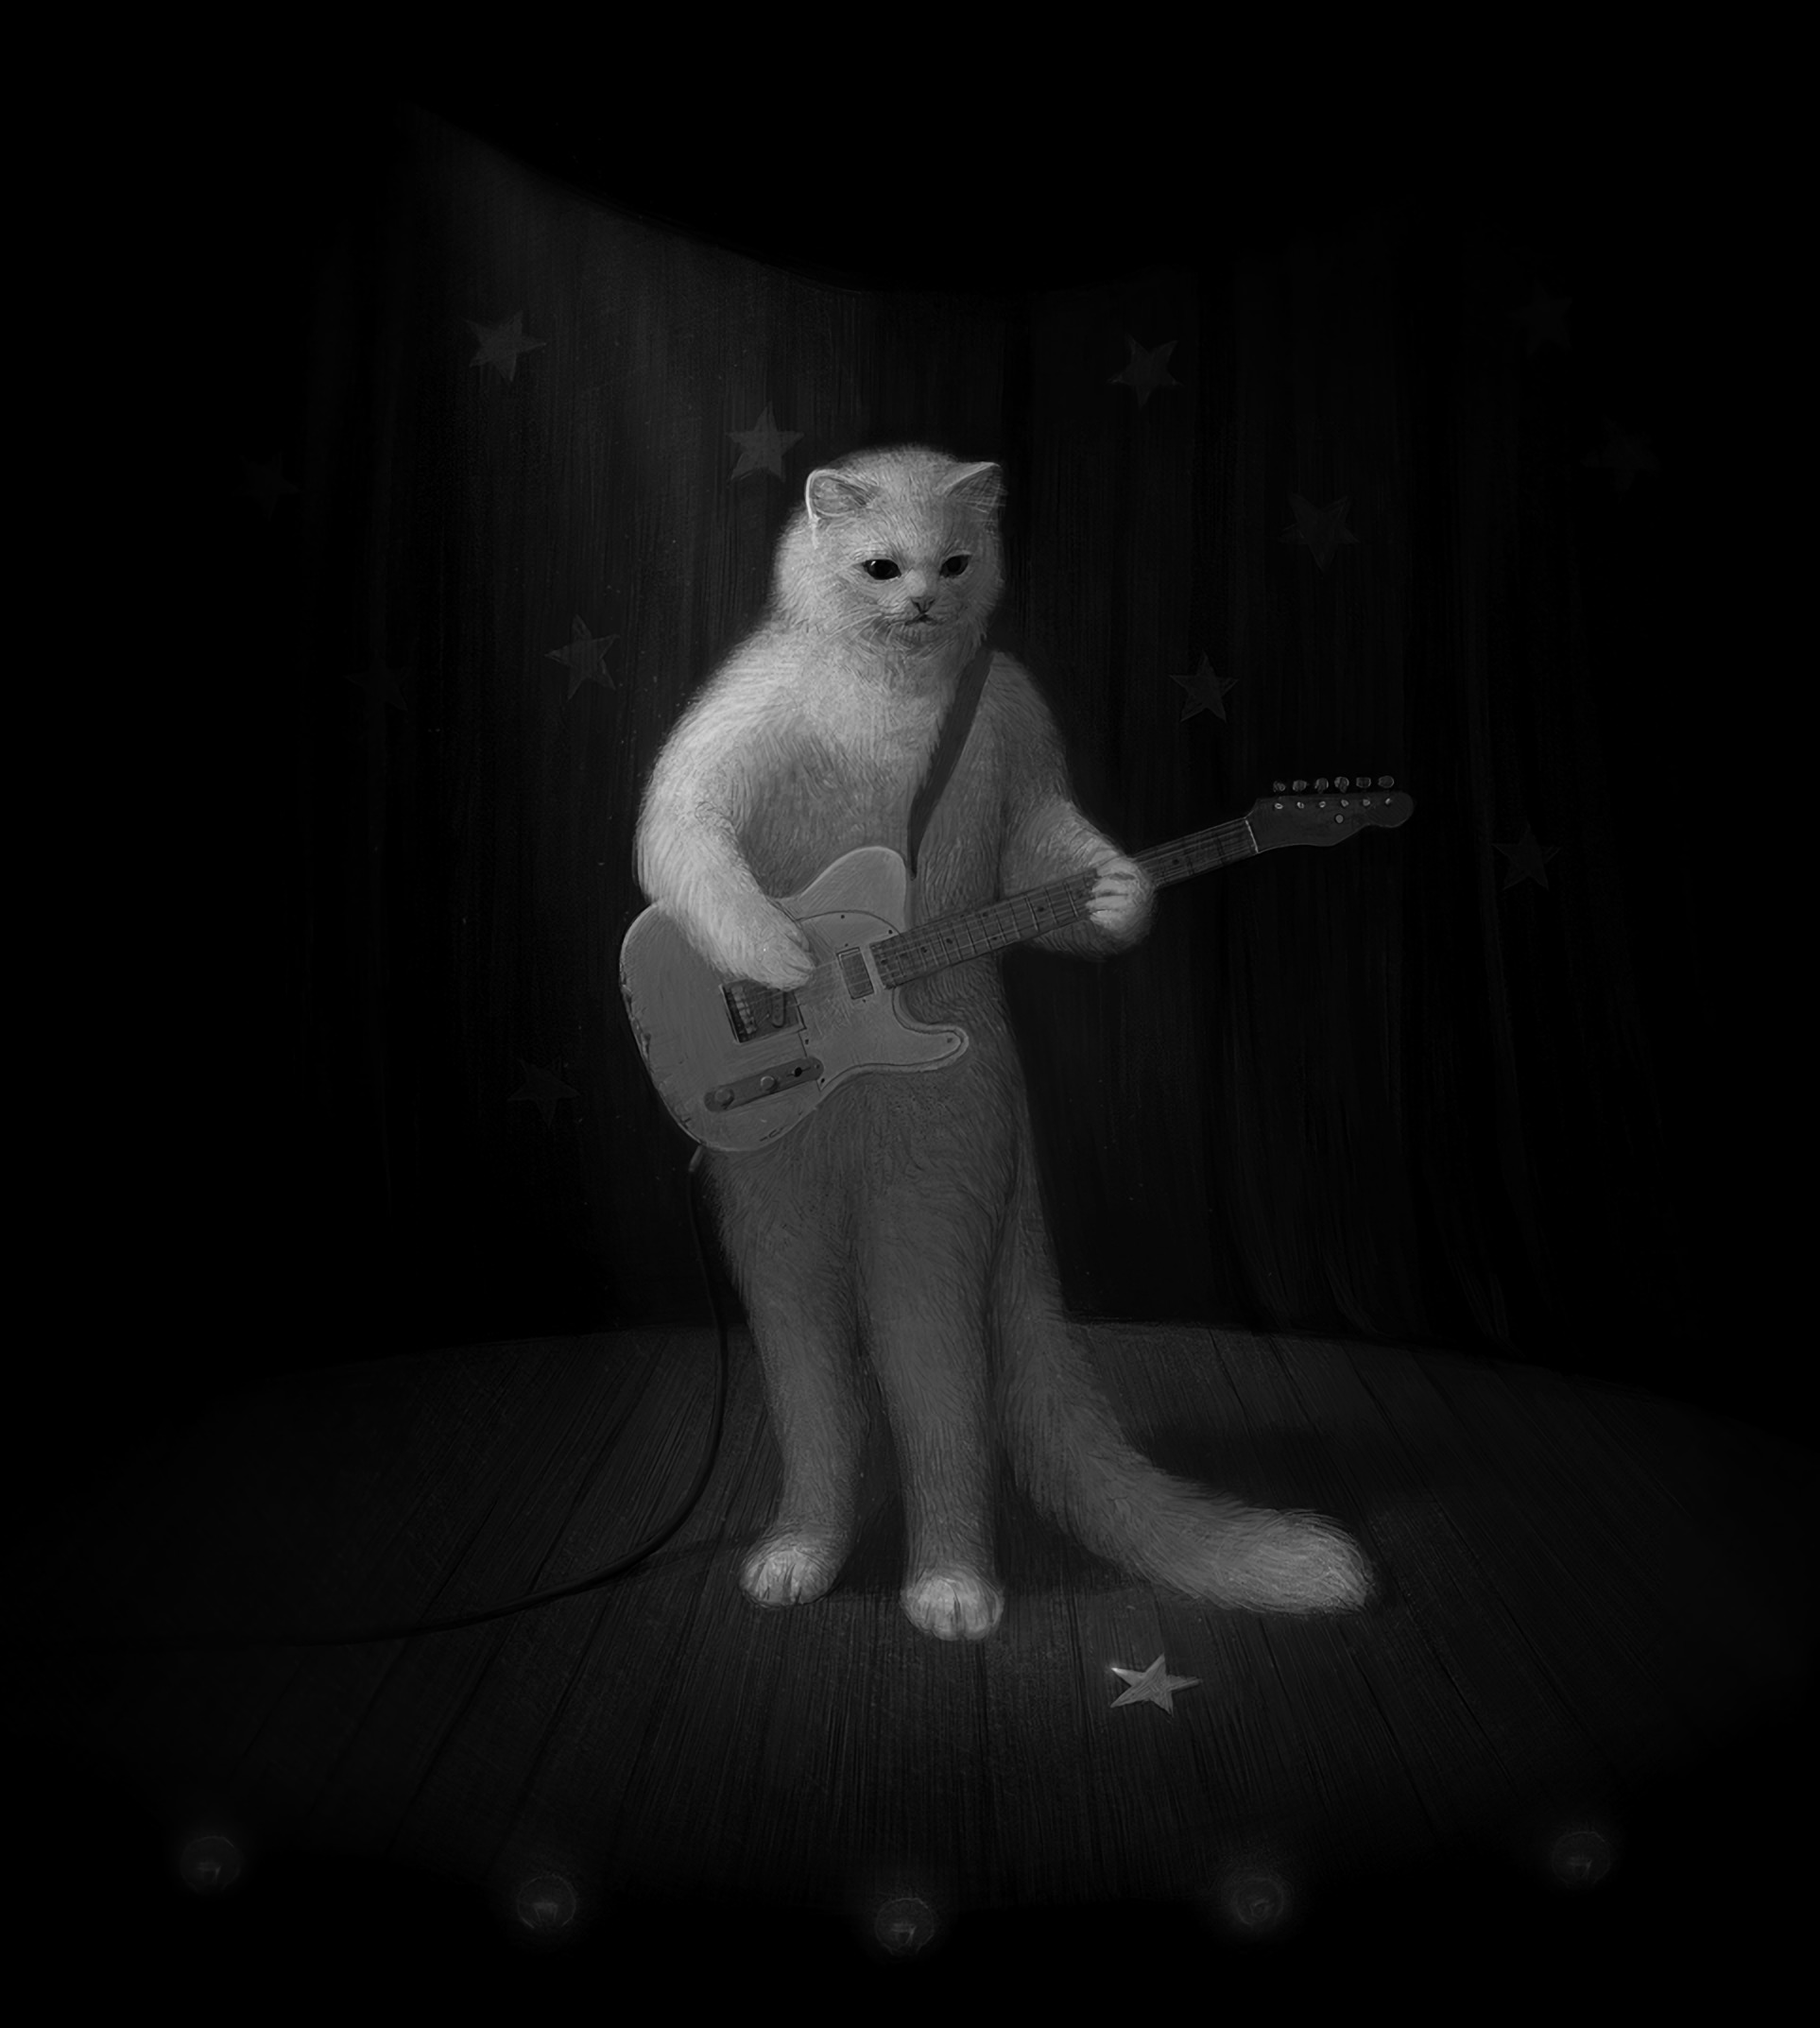 bw, art, musician, guitar, chb, cat for android